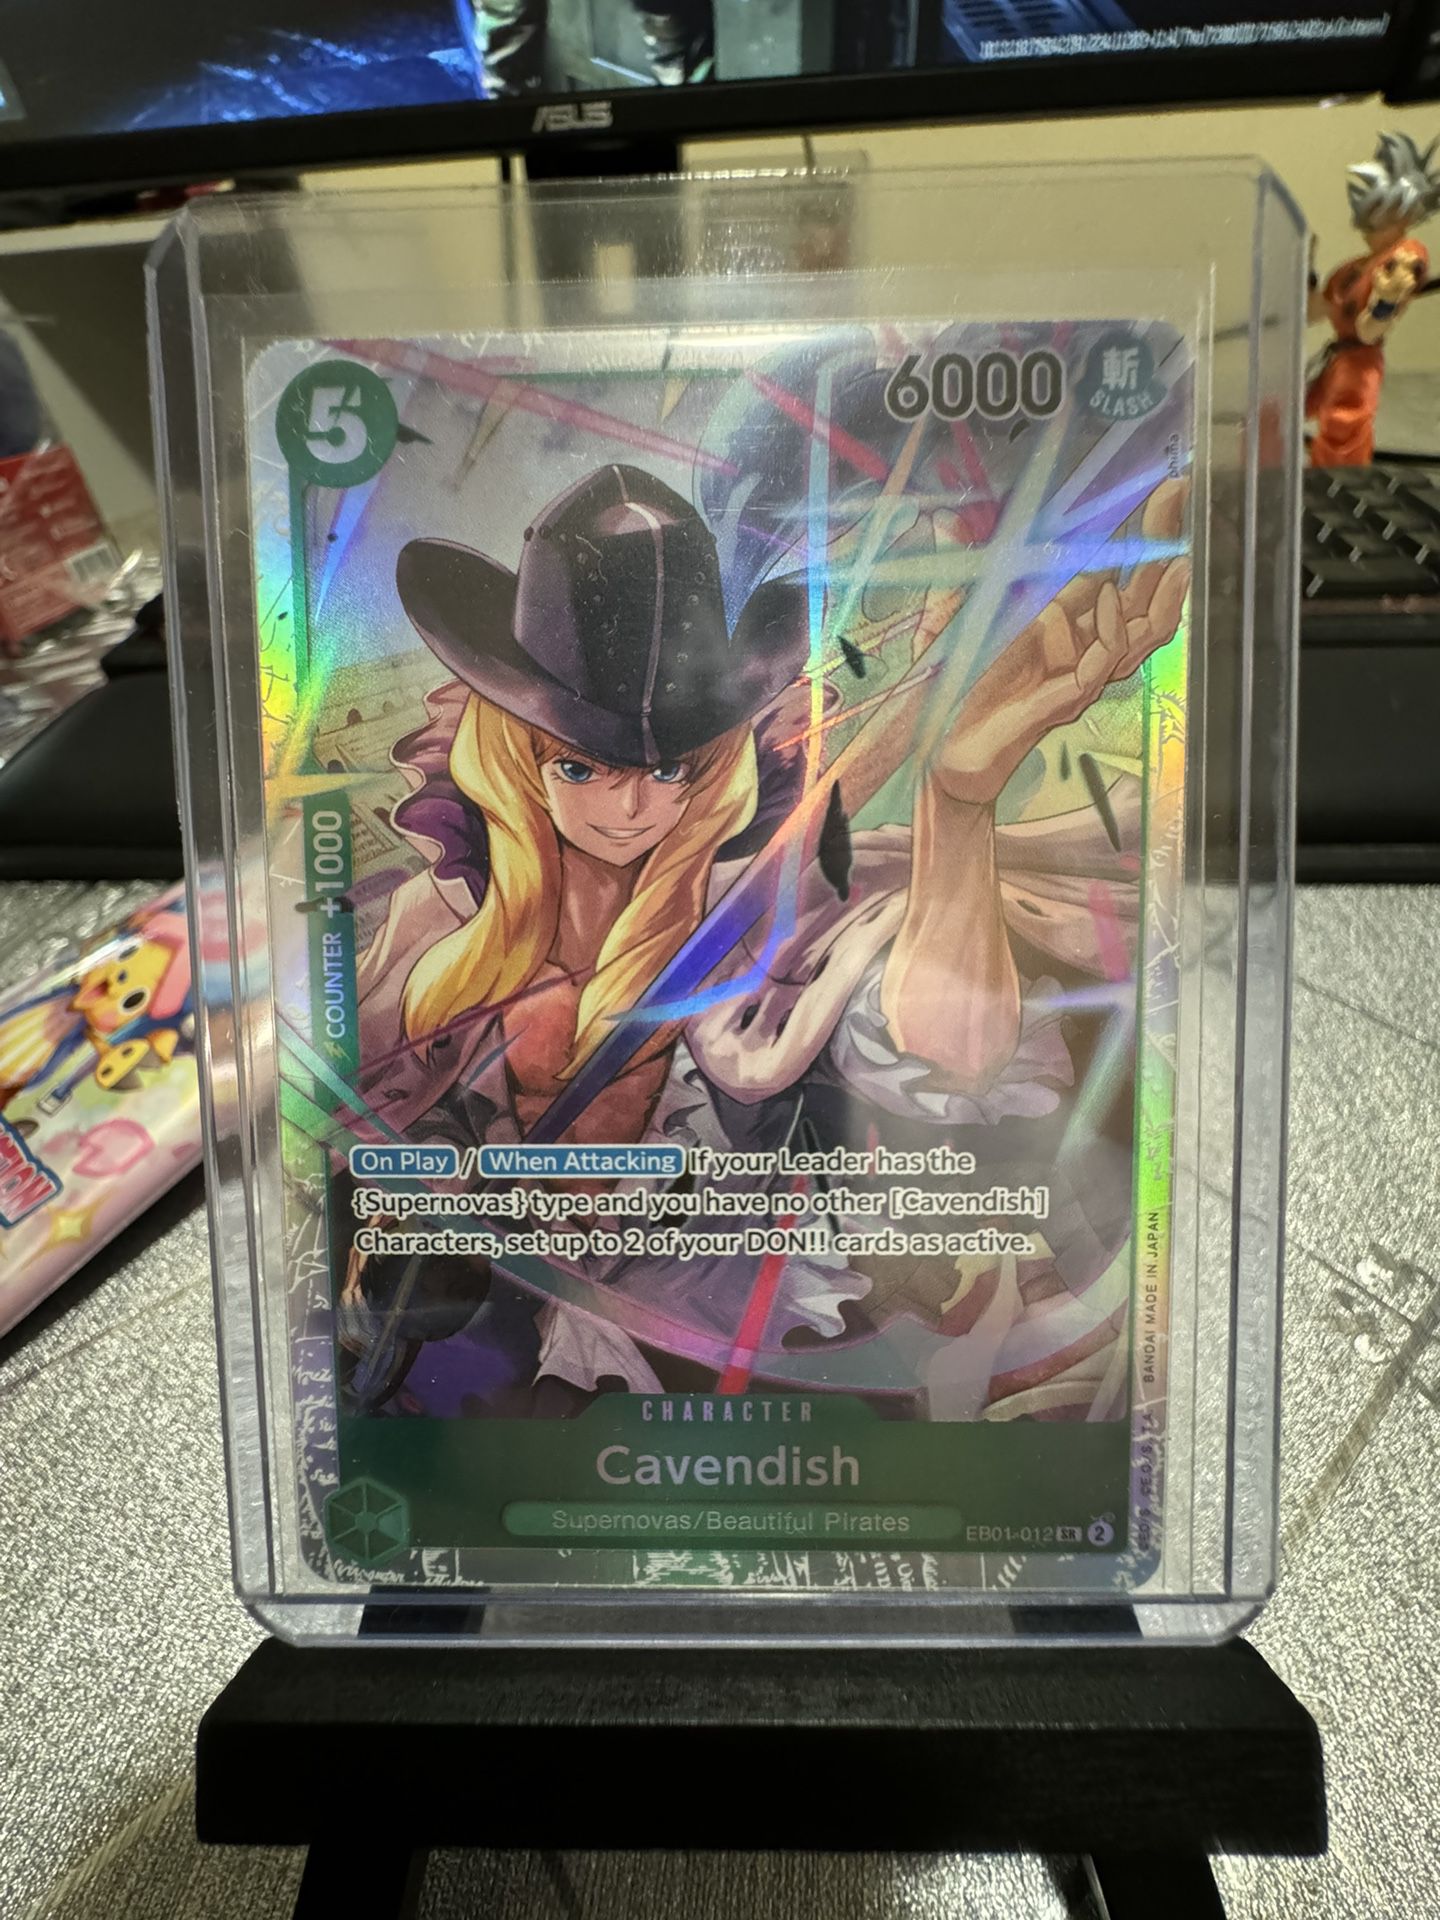 One Piece TCG “Cavendish” - Extra Booster: Memorial Collection (EB-01)